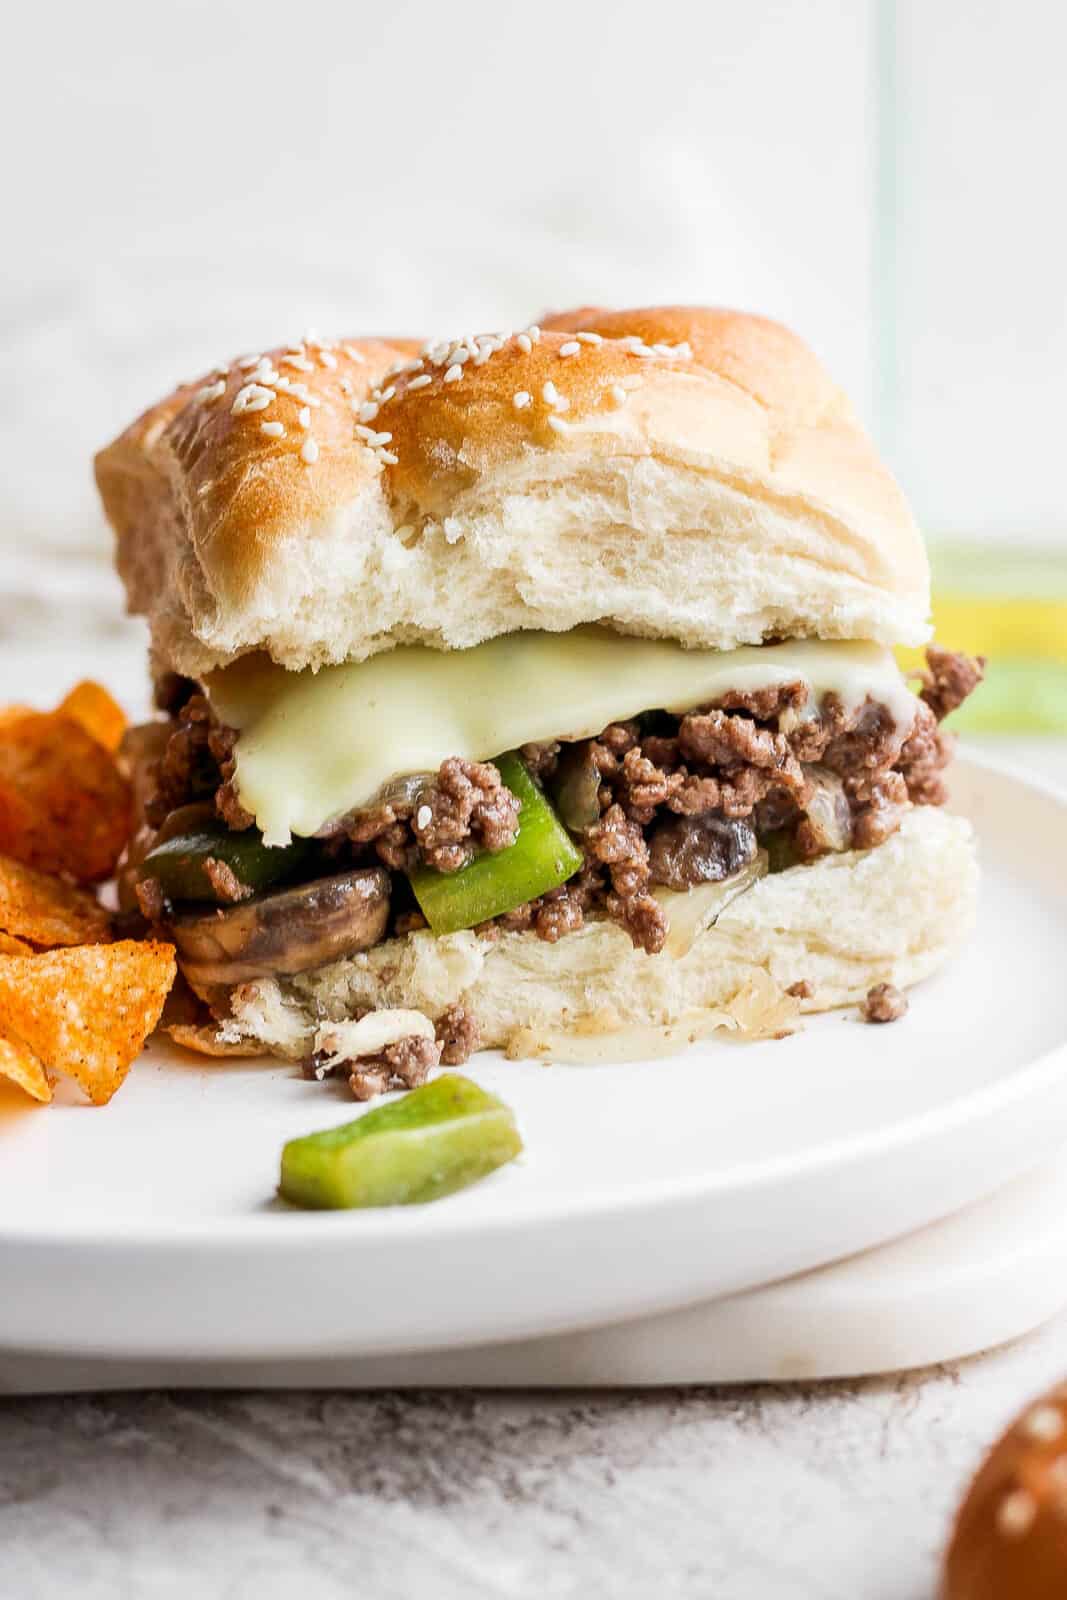 A philly cheese steak sloppy joe on a plate.